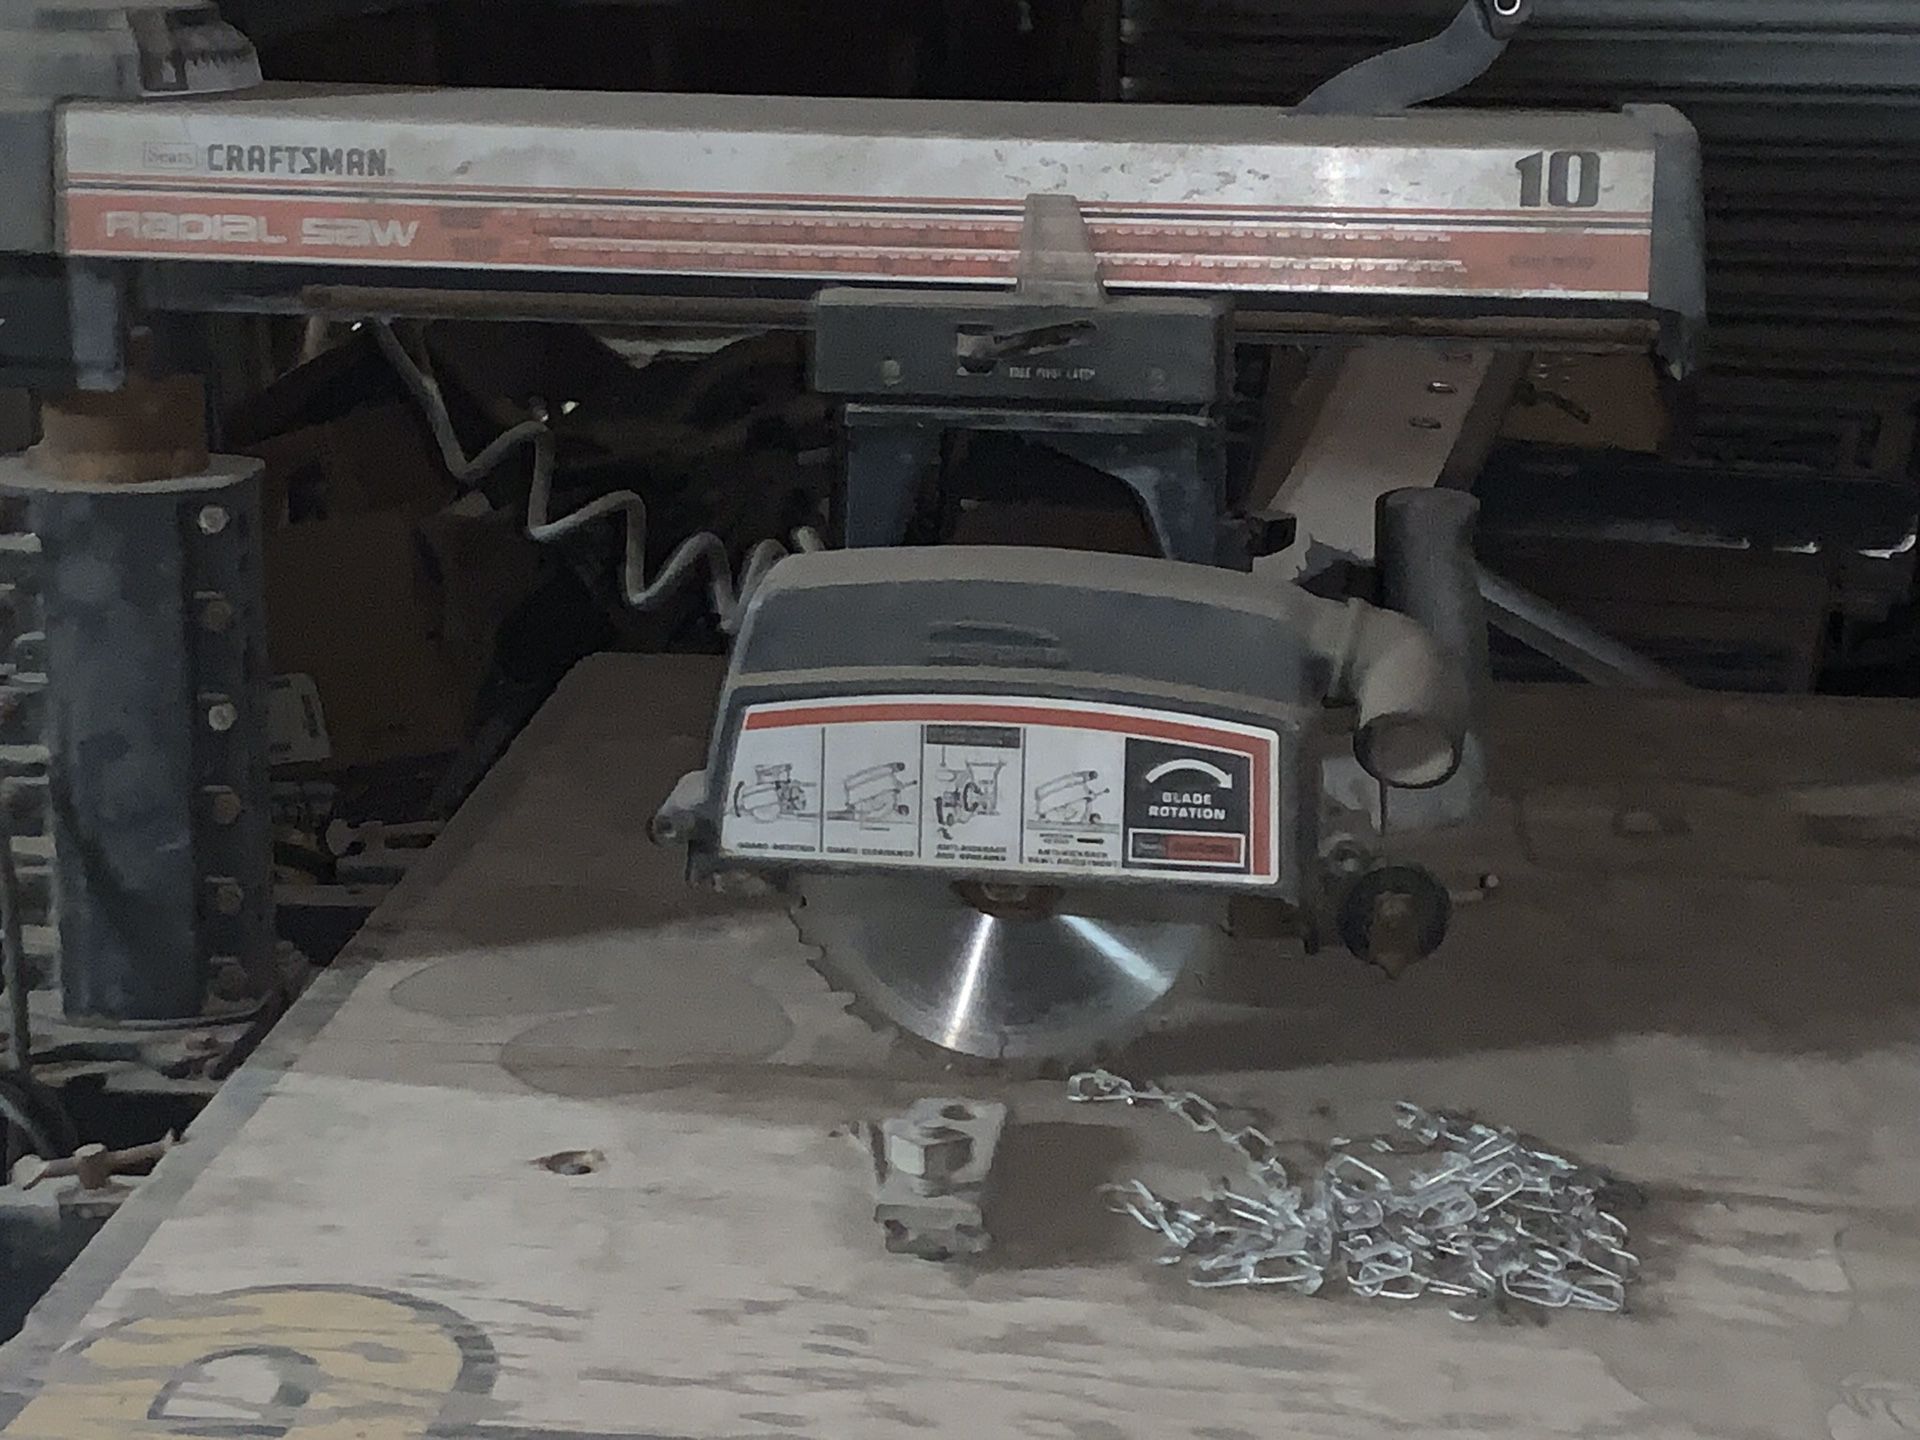 Radial arm saw in good working order